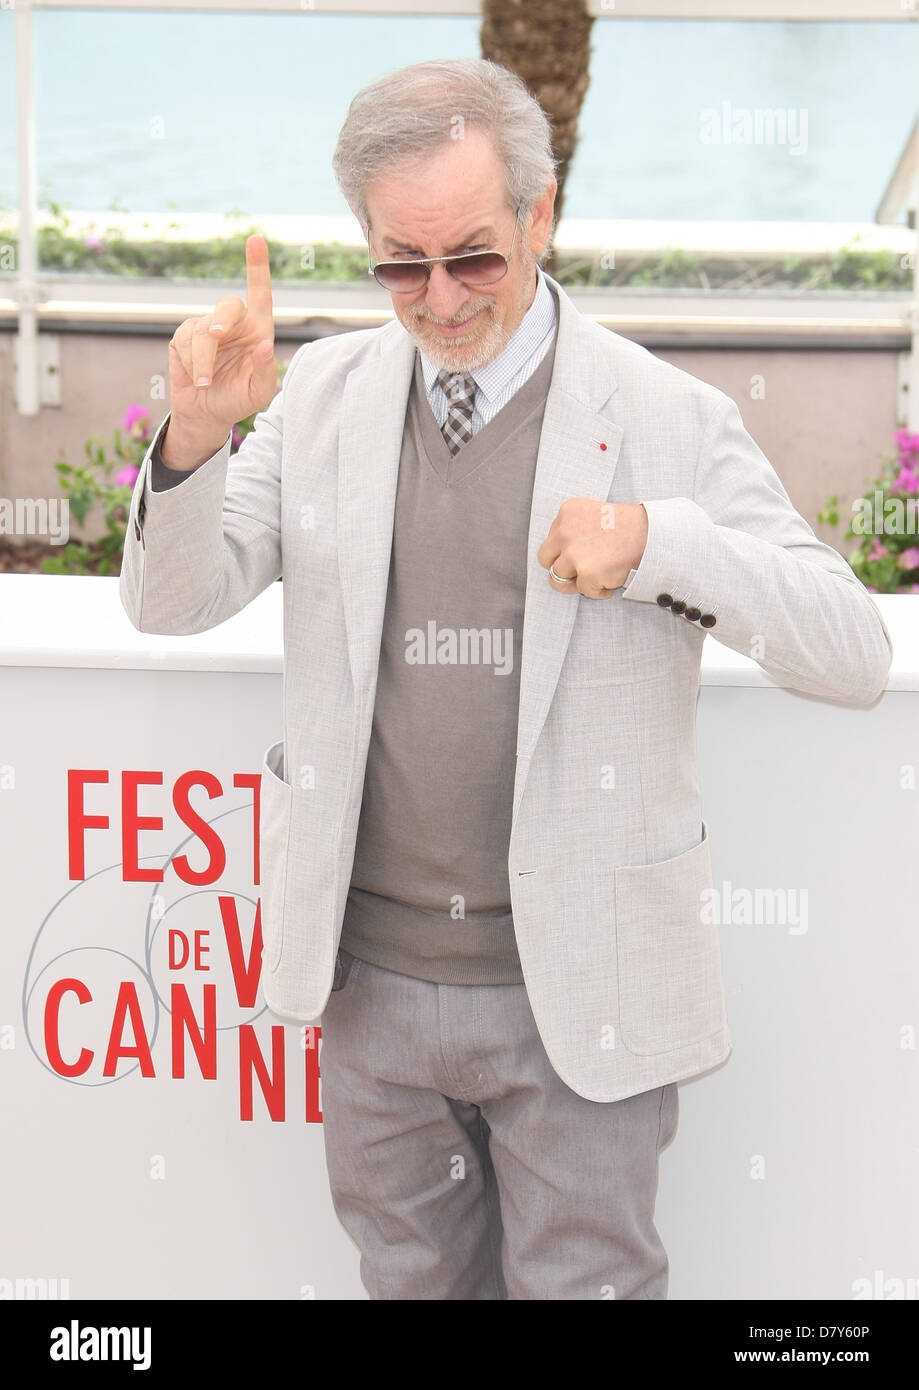 STEVEN SPIELBERG THE JURY. PHOTOCALL. CANNES FILM FESTIVAL 2013 CANNES  FRANCE 15 May 2013 Stock Photo